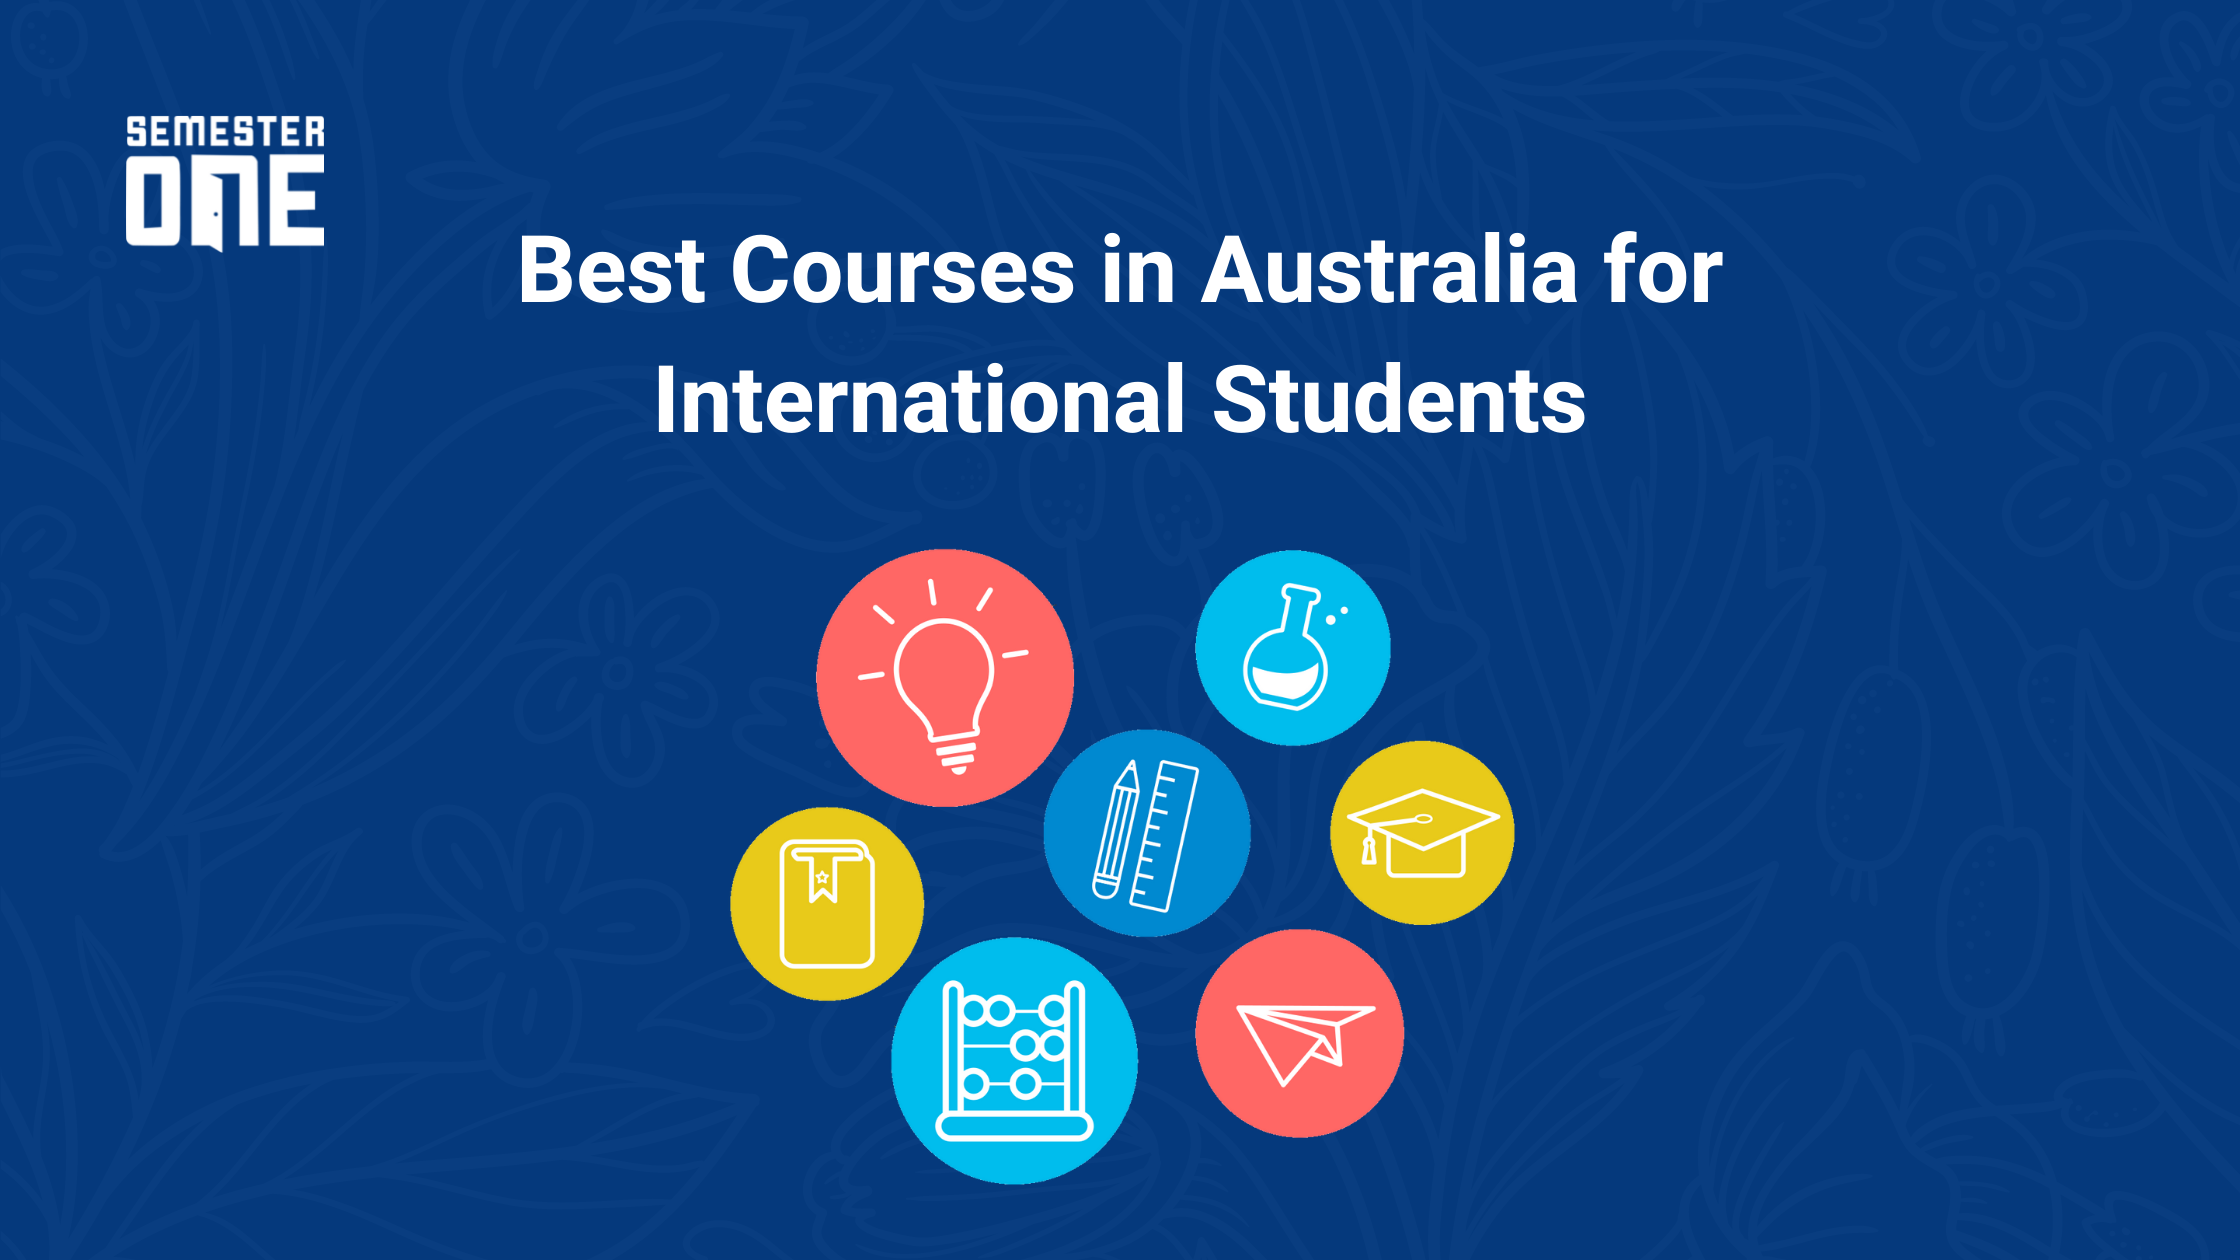 Best Courses in Australia for International Students banner